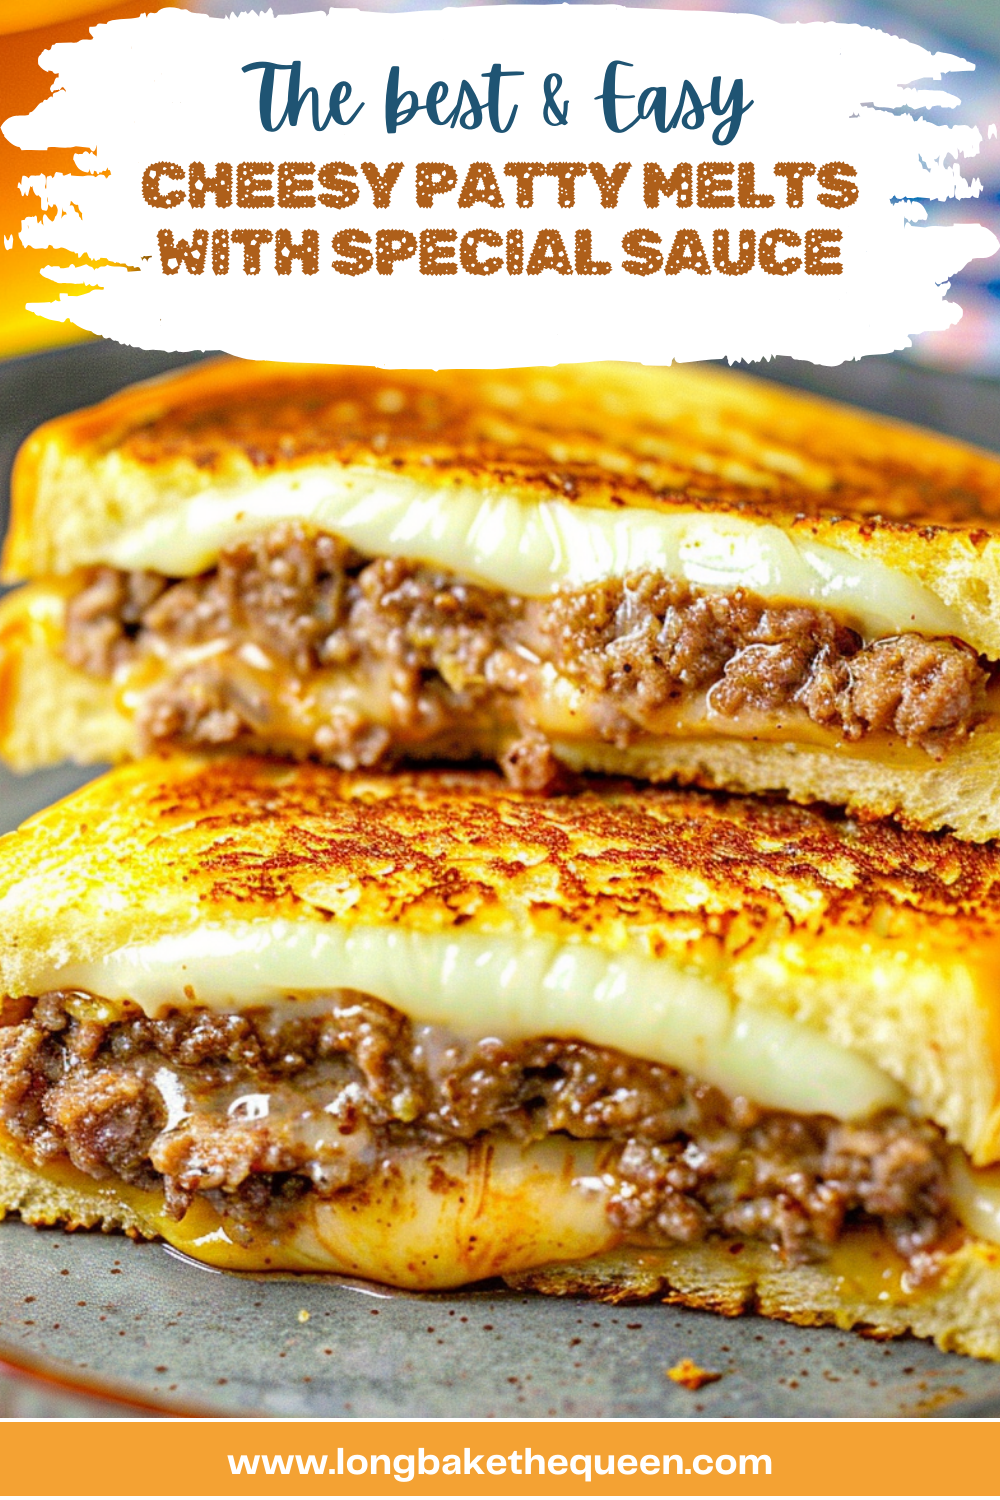 Cheesy Patty Melts with Special Sauce